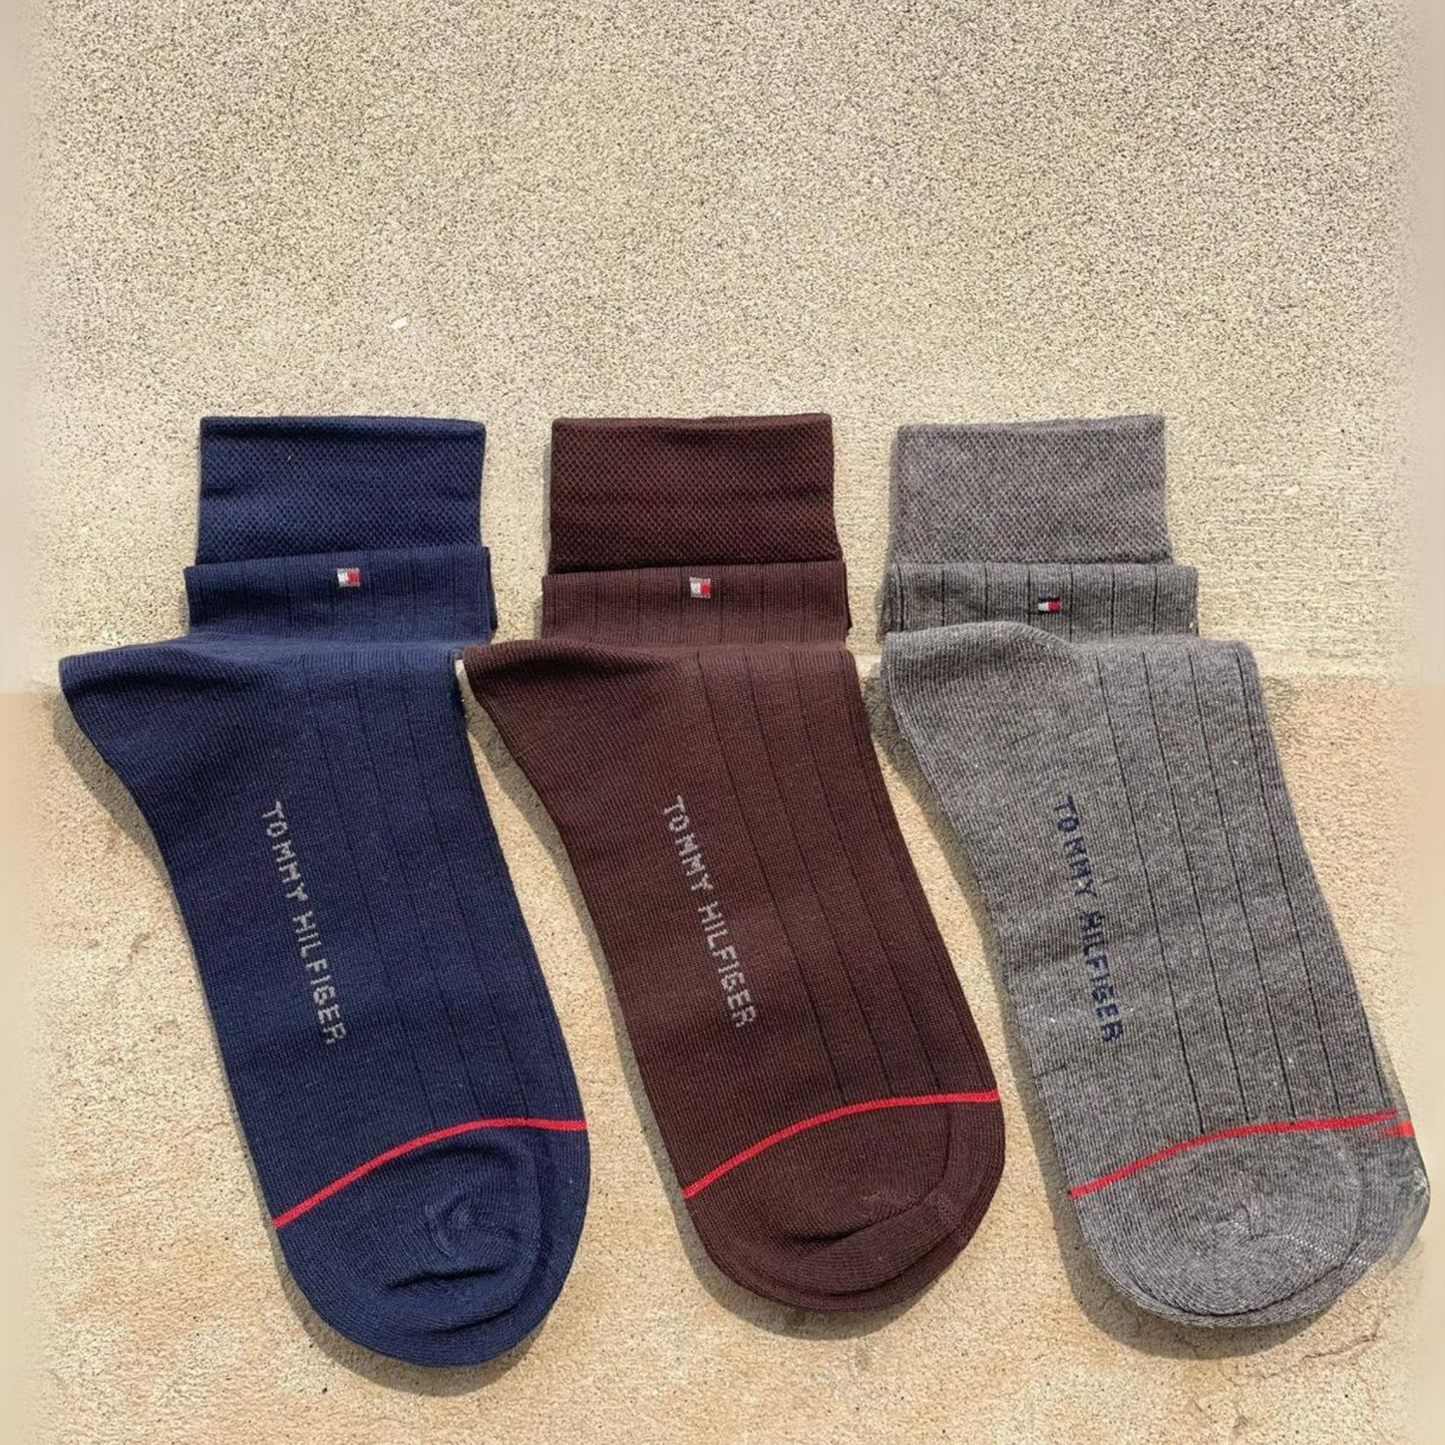 TM(Tommy Hilfiger) Brand 3 Colors Socks for Men with Premium Gift Packing Export Quality